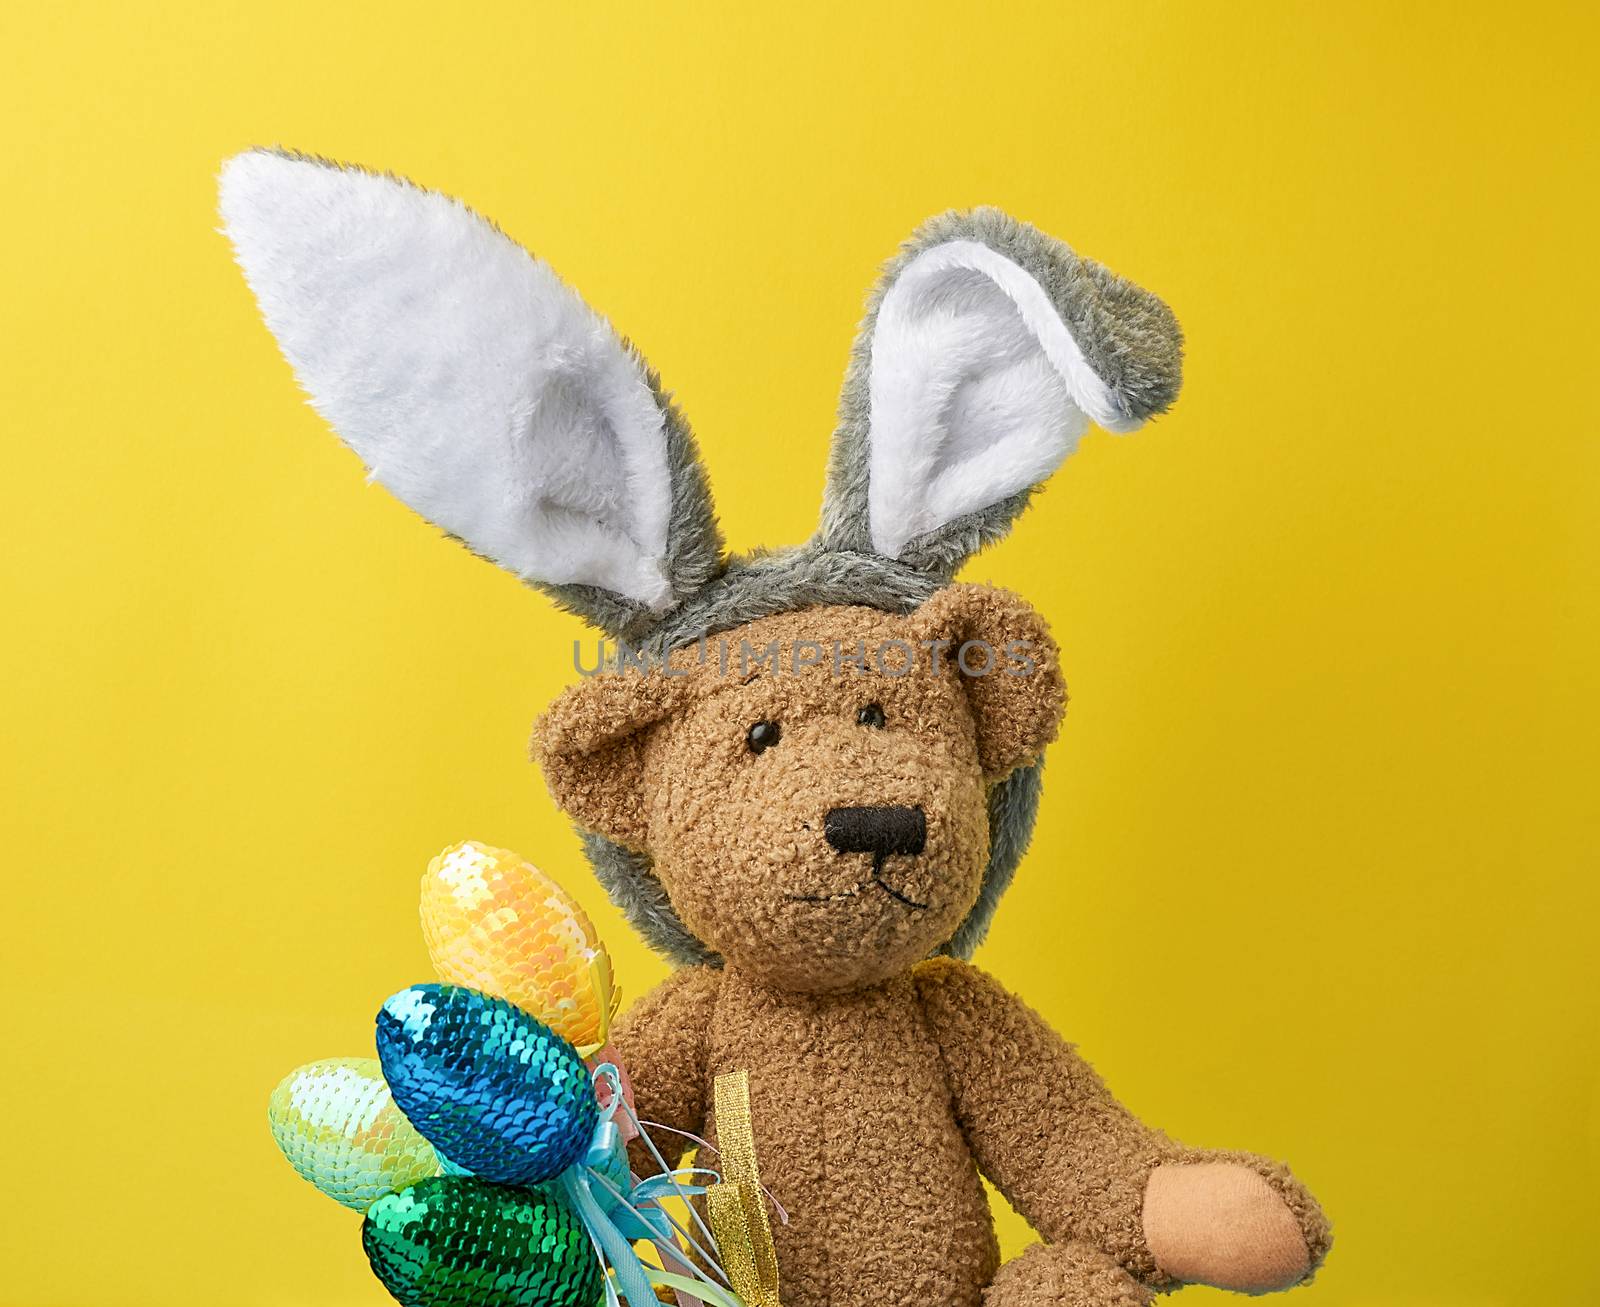 cute brown teddy bear holding colorful Easter eggs, wearing a rabbit mask with long ears on his head, funny holiday card